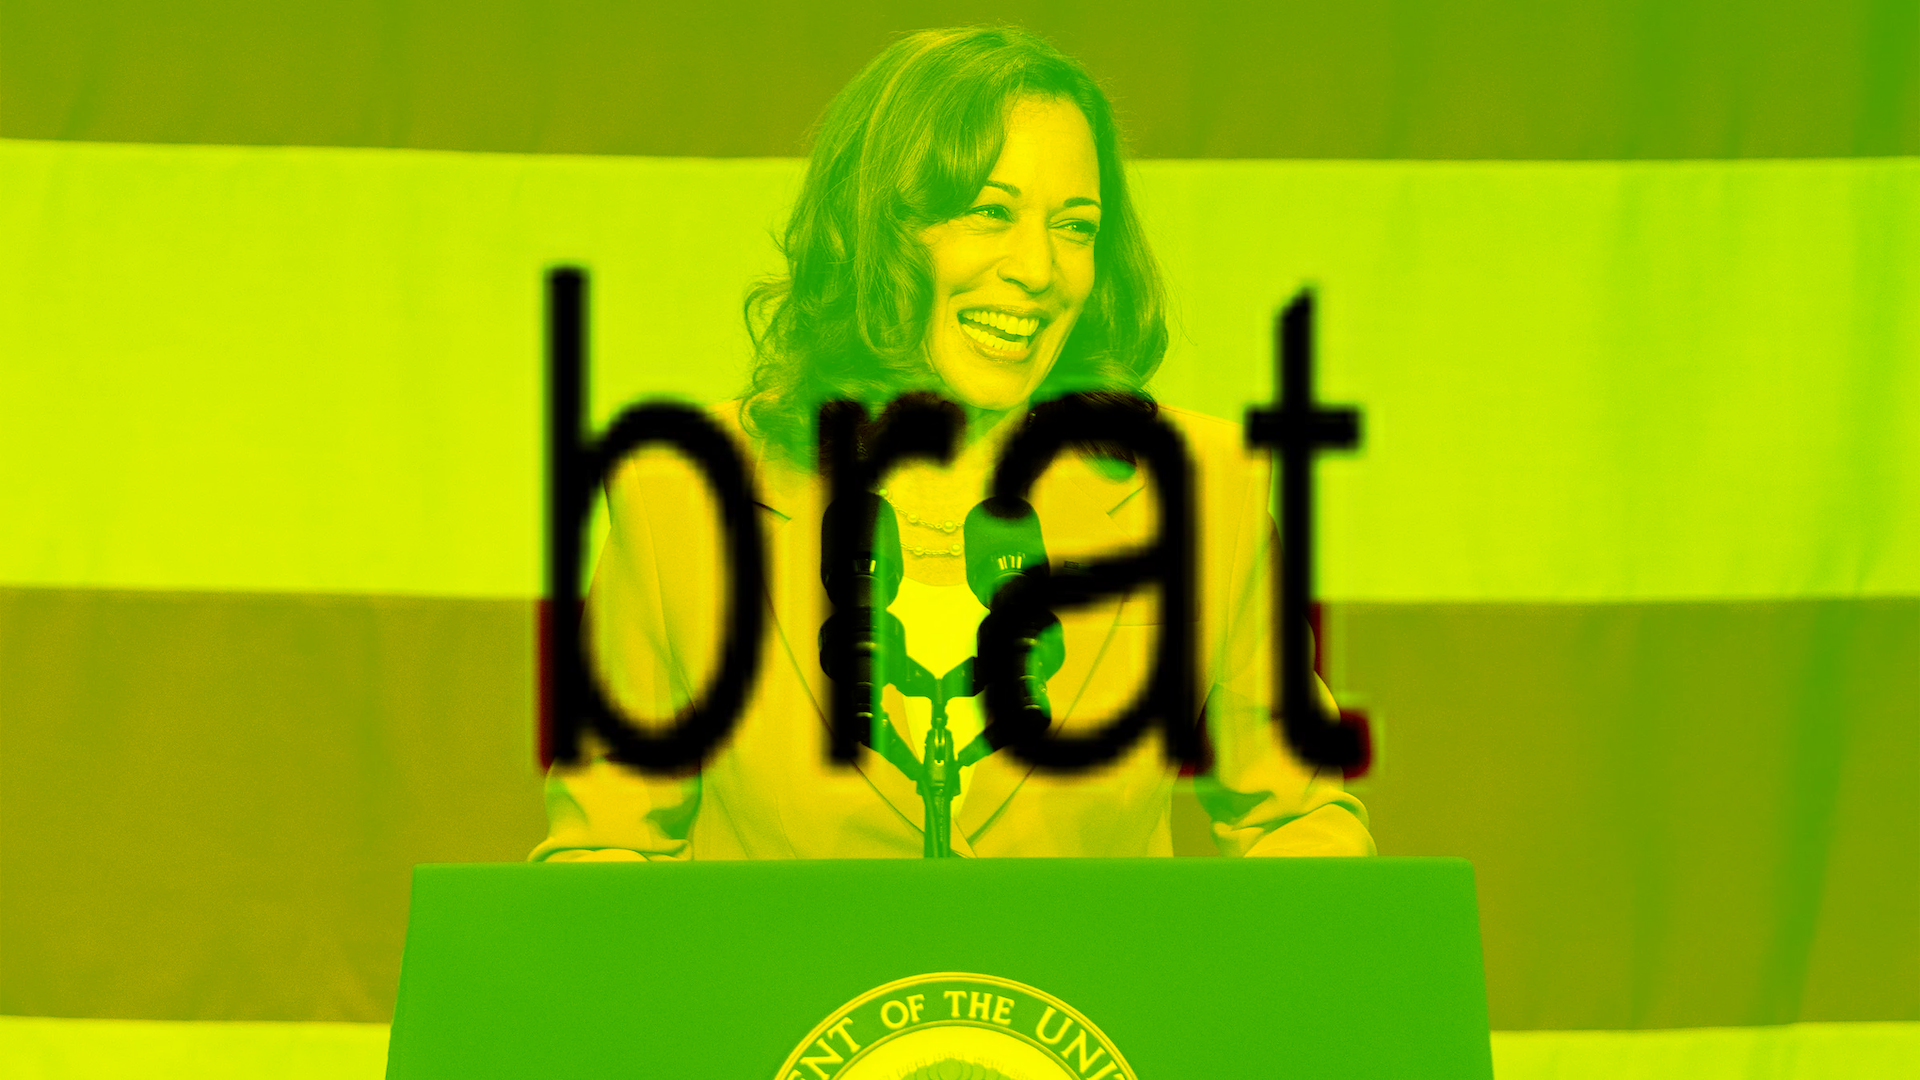 Brat Summer for Kamala Harris? Meme Coin Traders Are Onboard